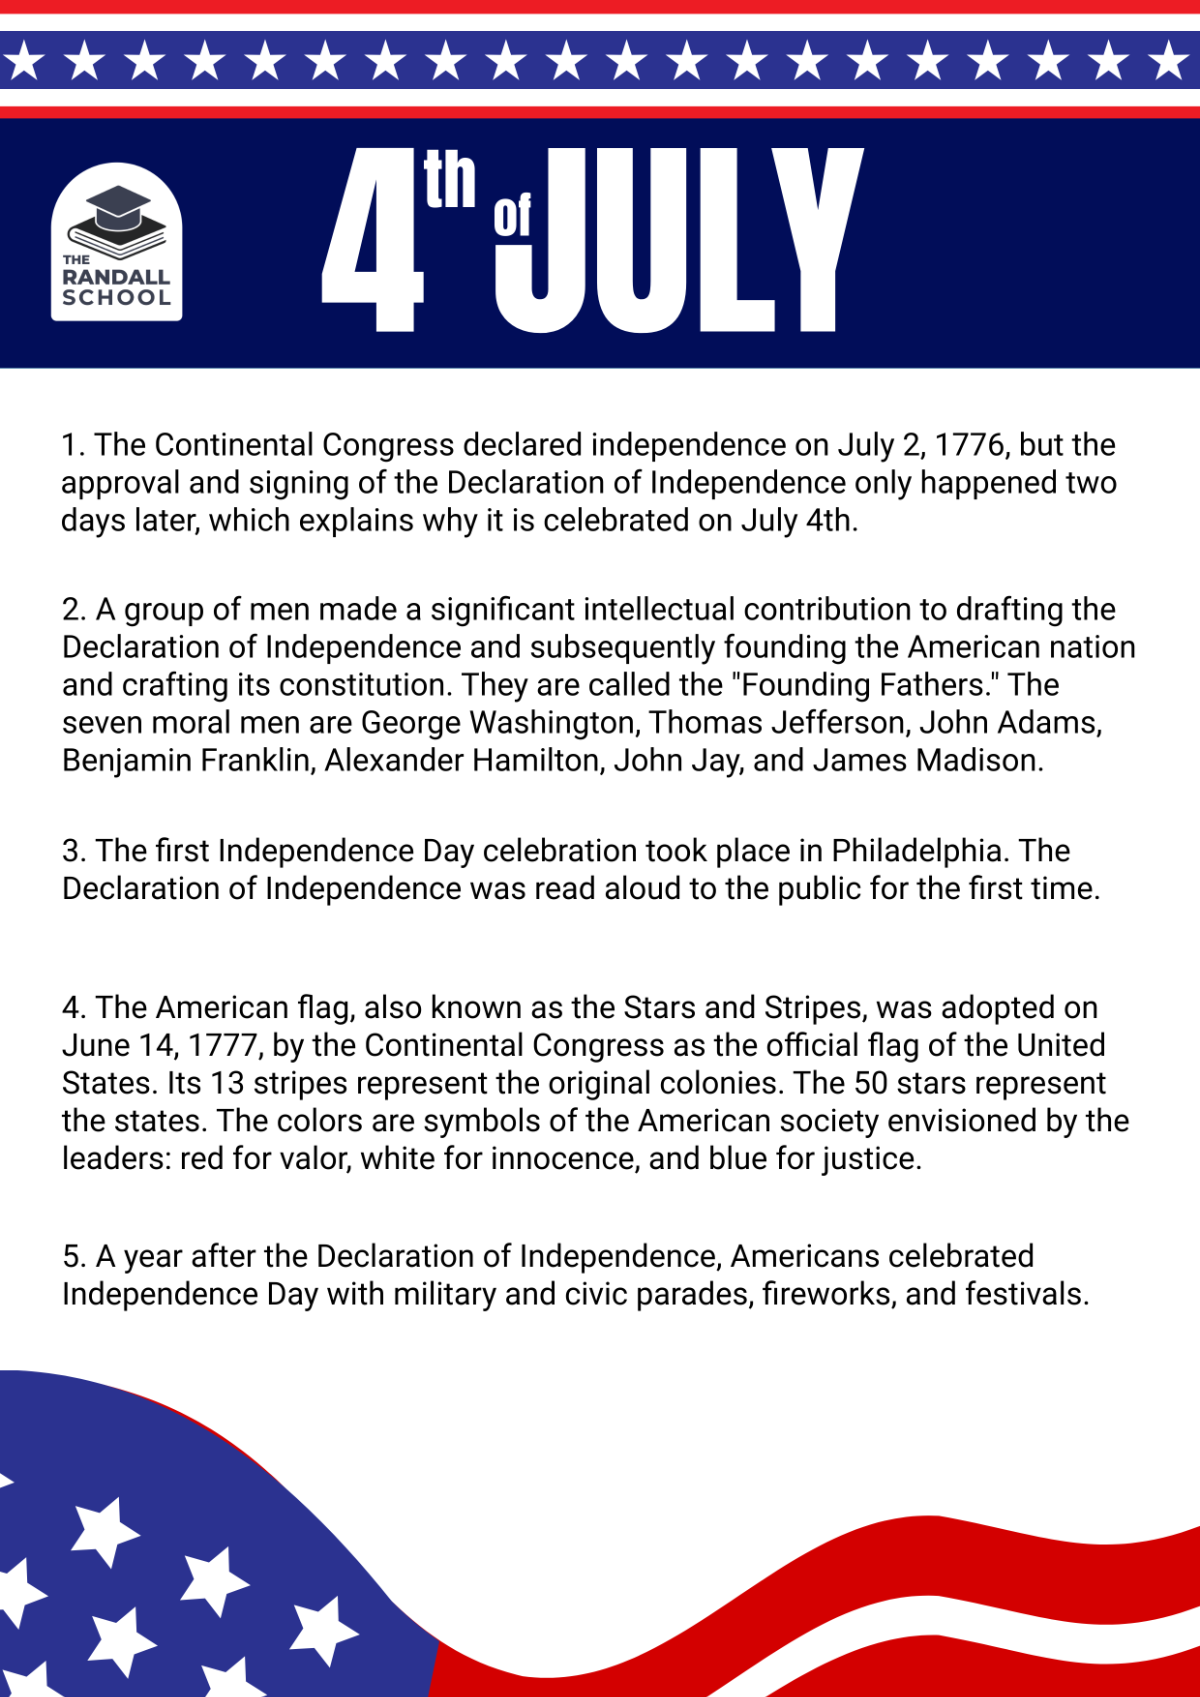 Free July 4th Fact Sheet Template